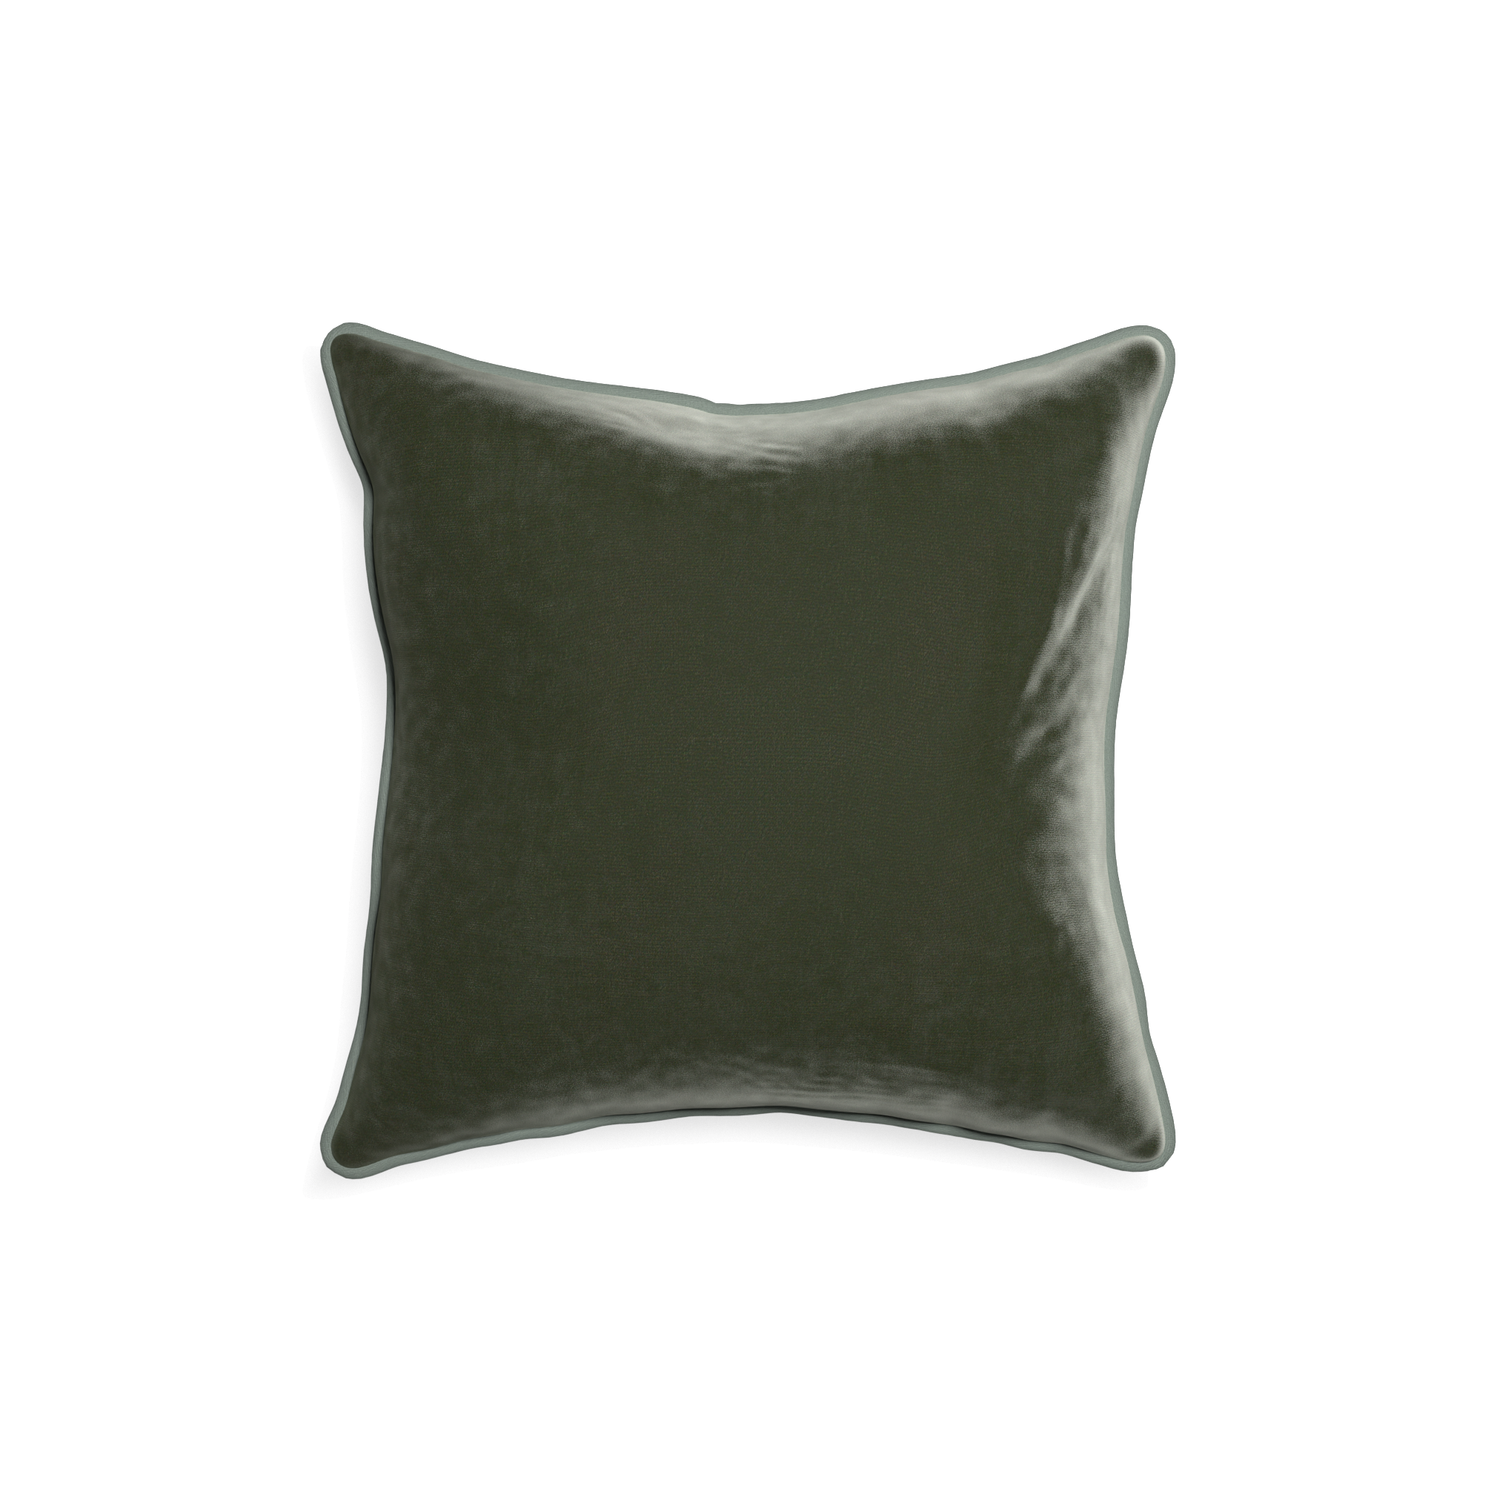 18-square fern velvet custom fern greenpillow with sage piping on white background